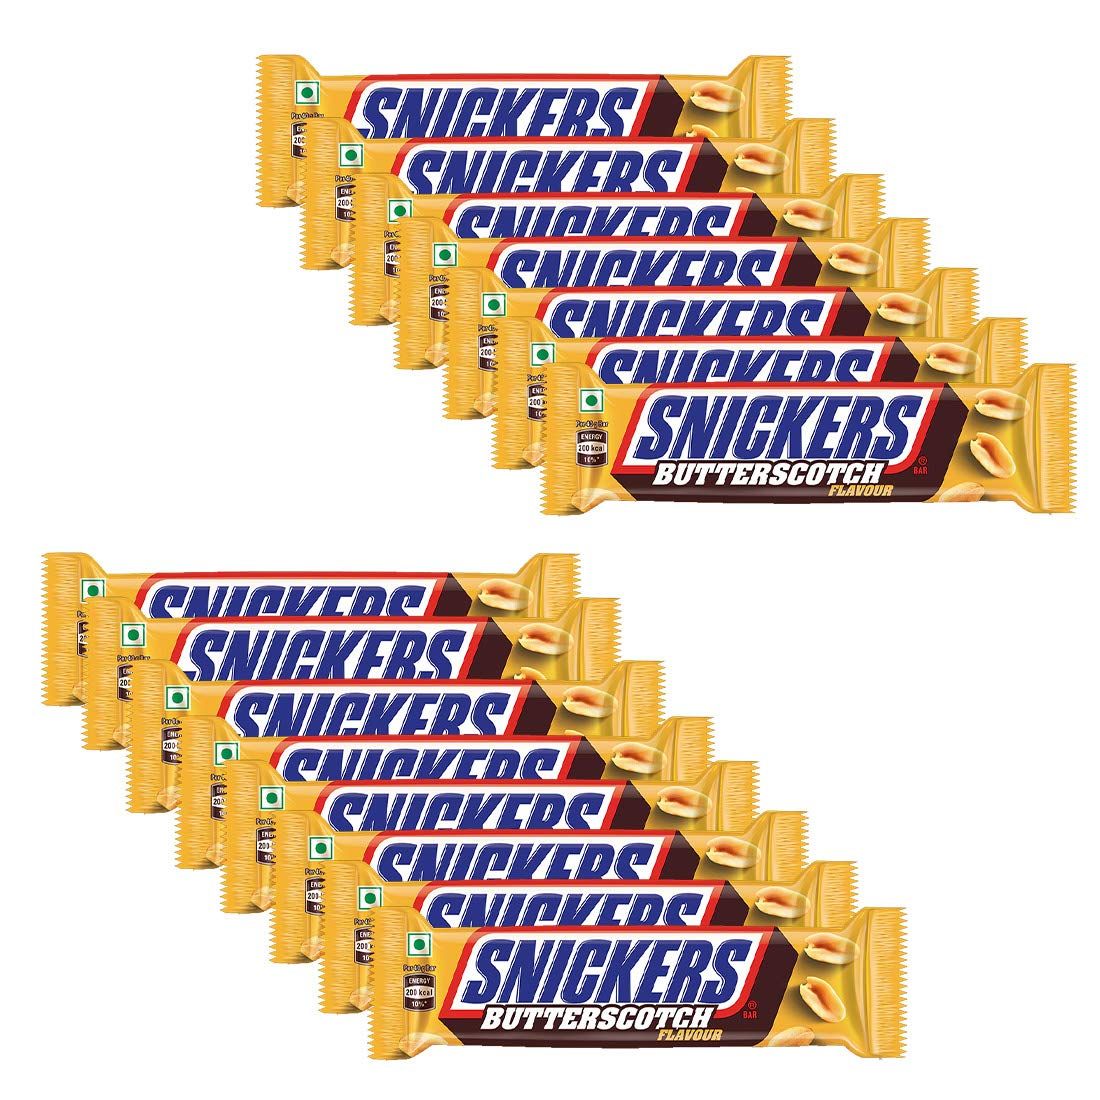 Snickers Butterscotch Flavour Chocolates Image